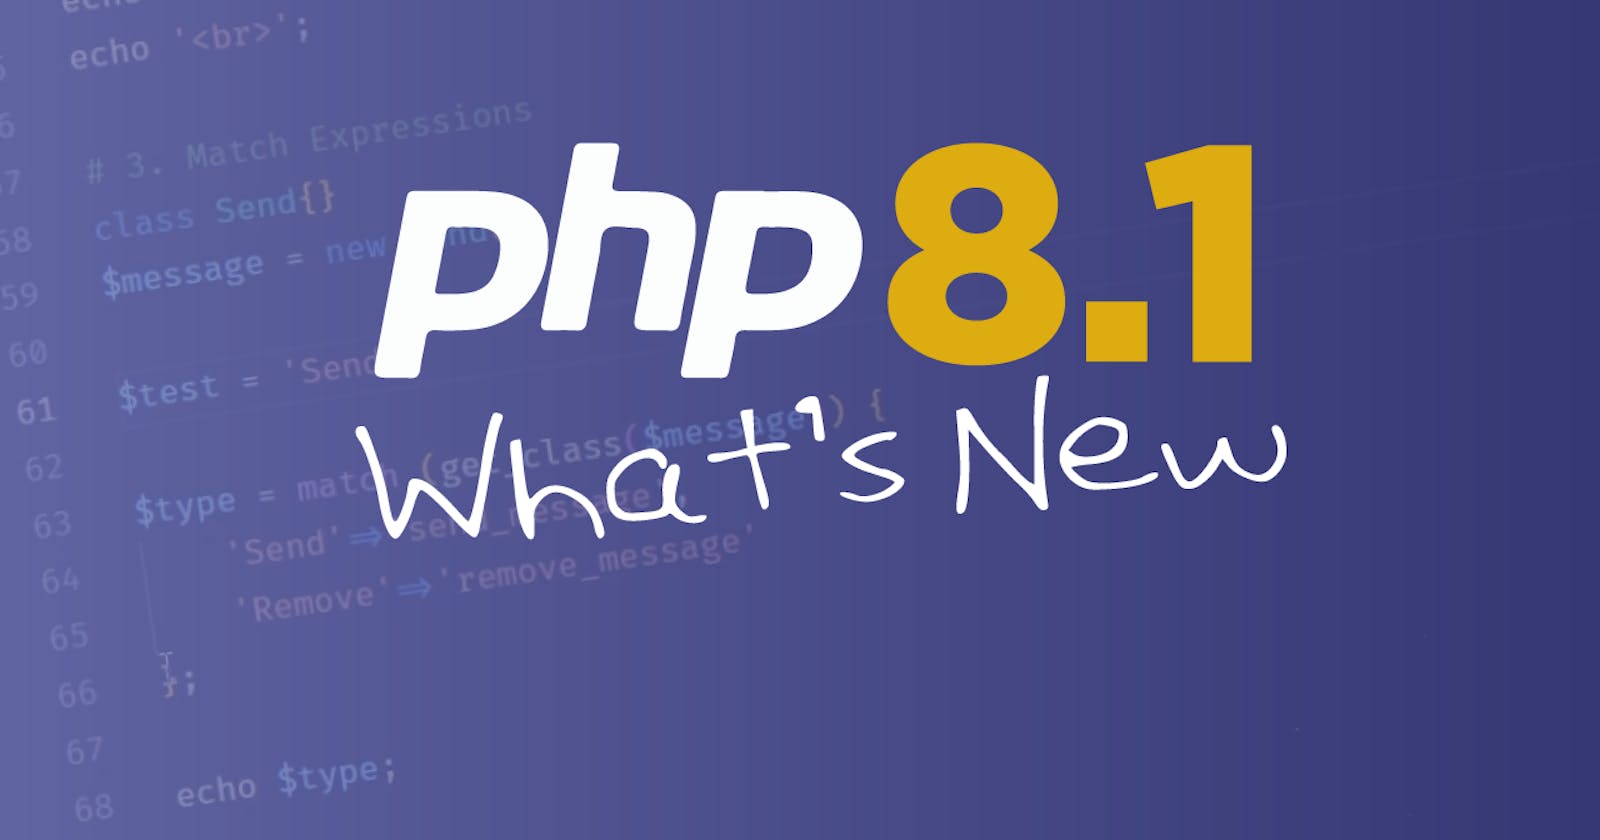 What's New in PHP 8.1?